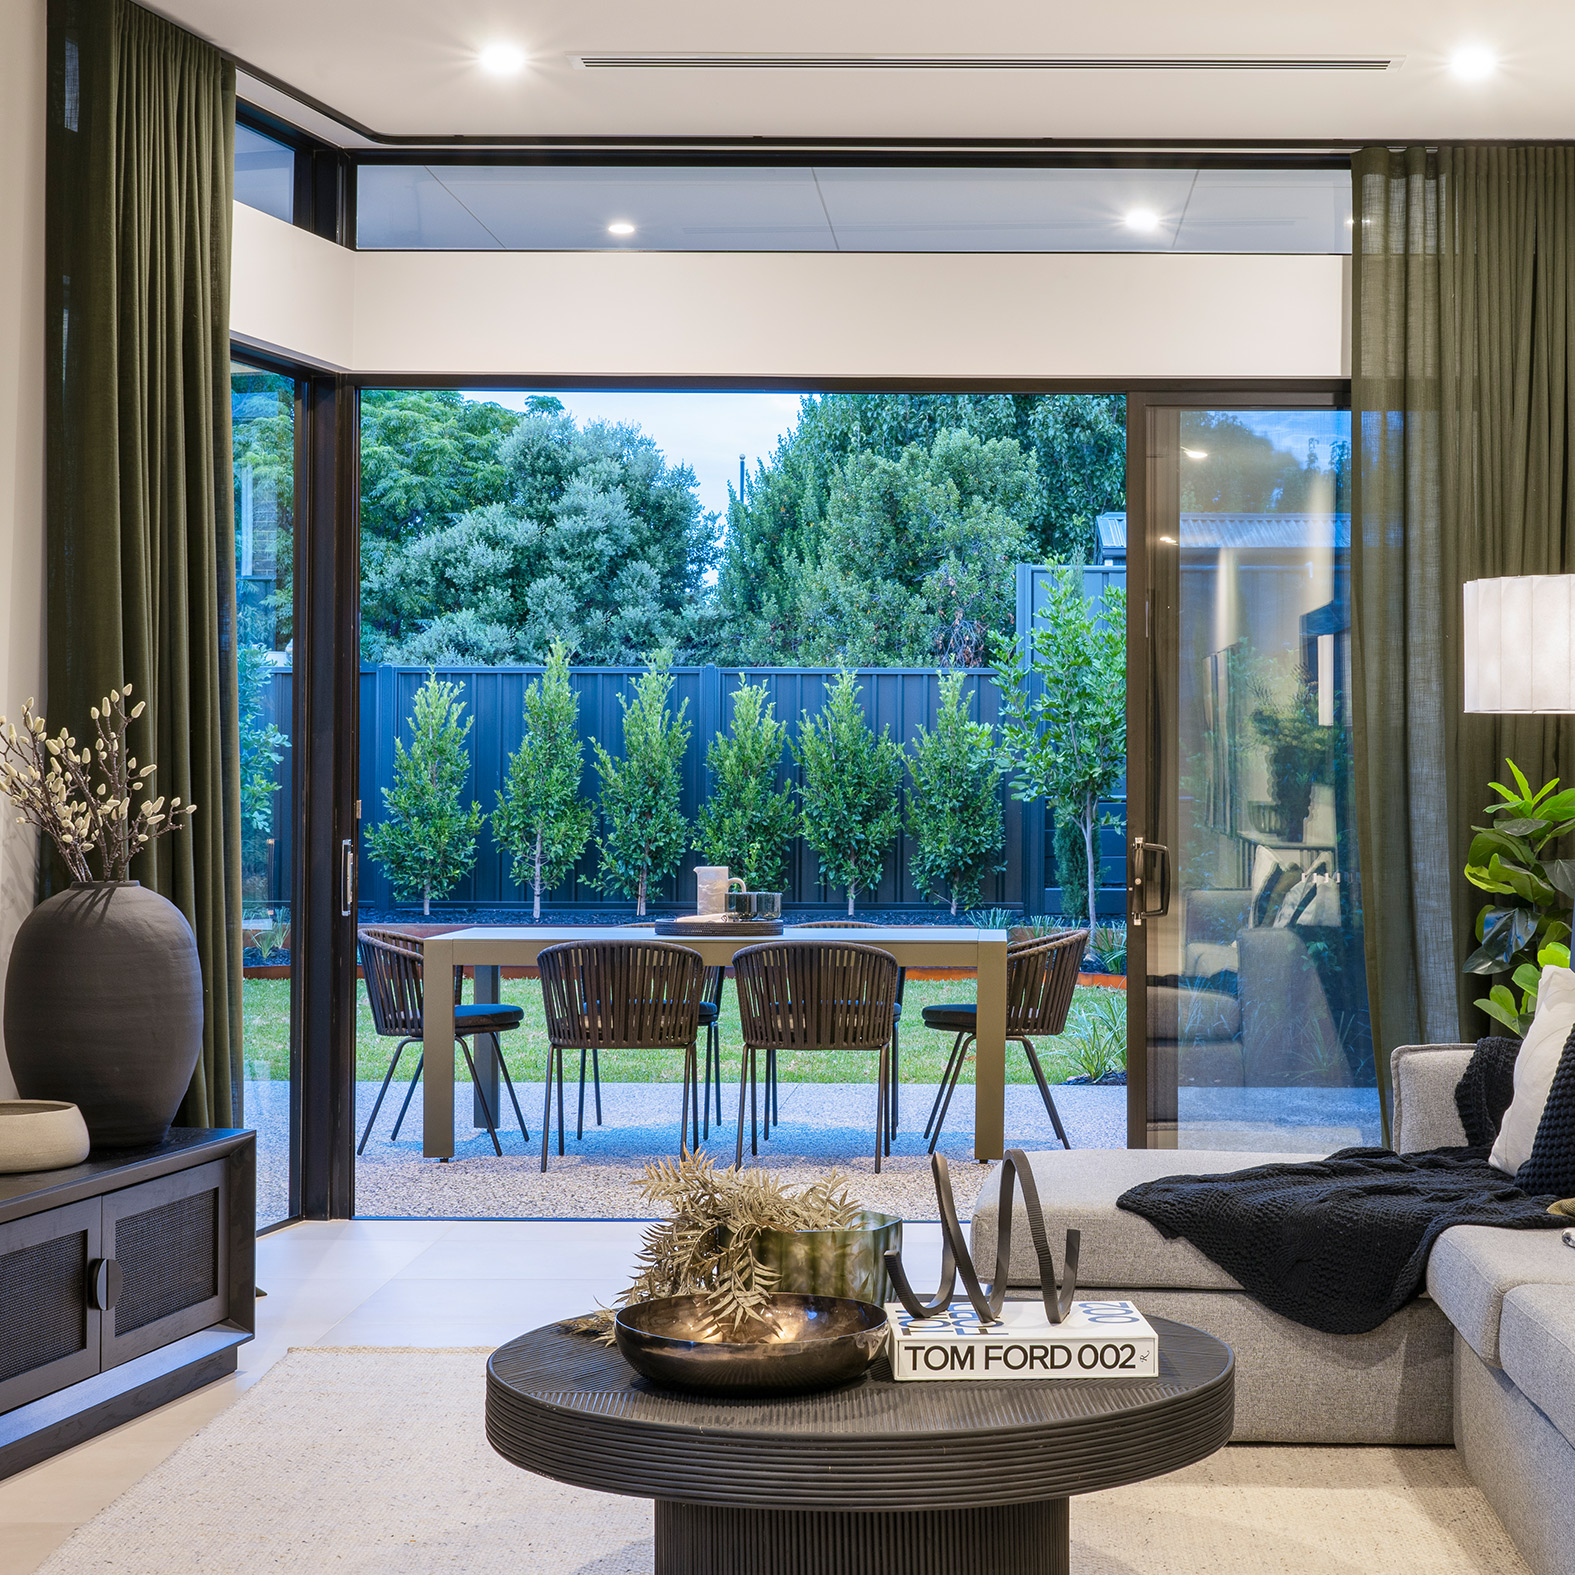 Living area with back sliding doors open to the backyard alfresco area